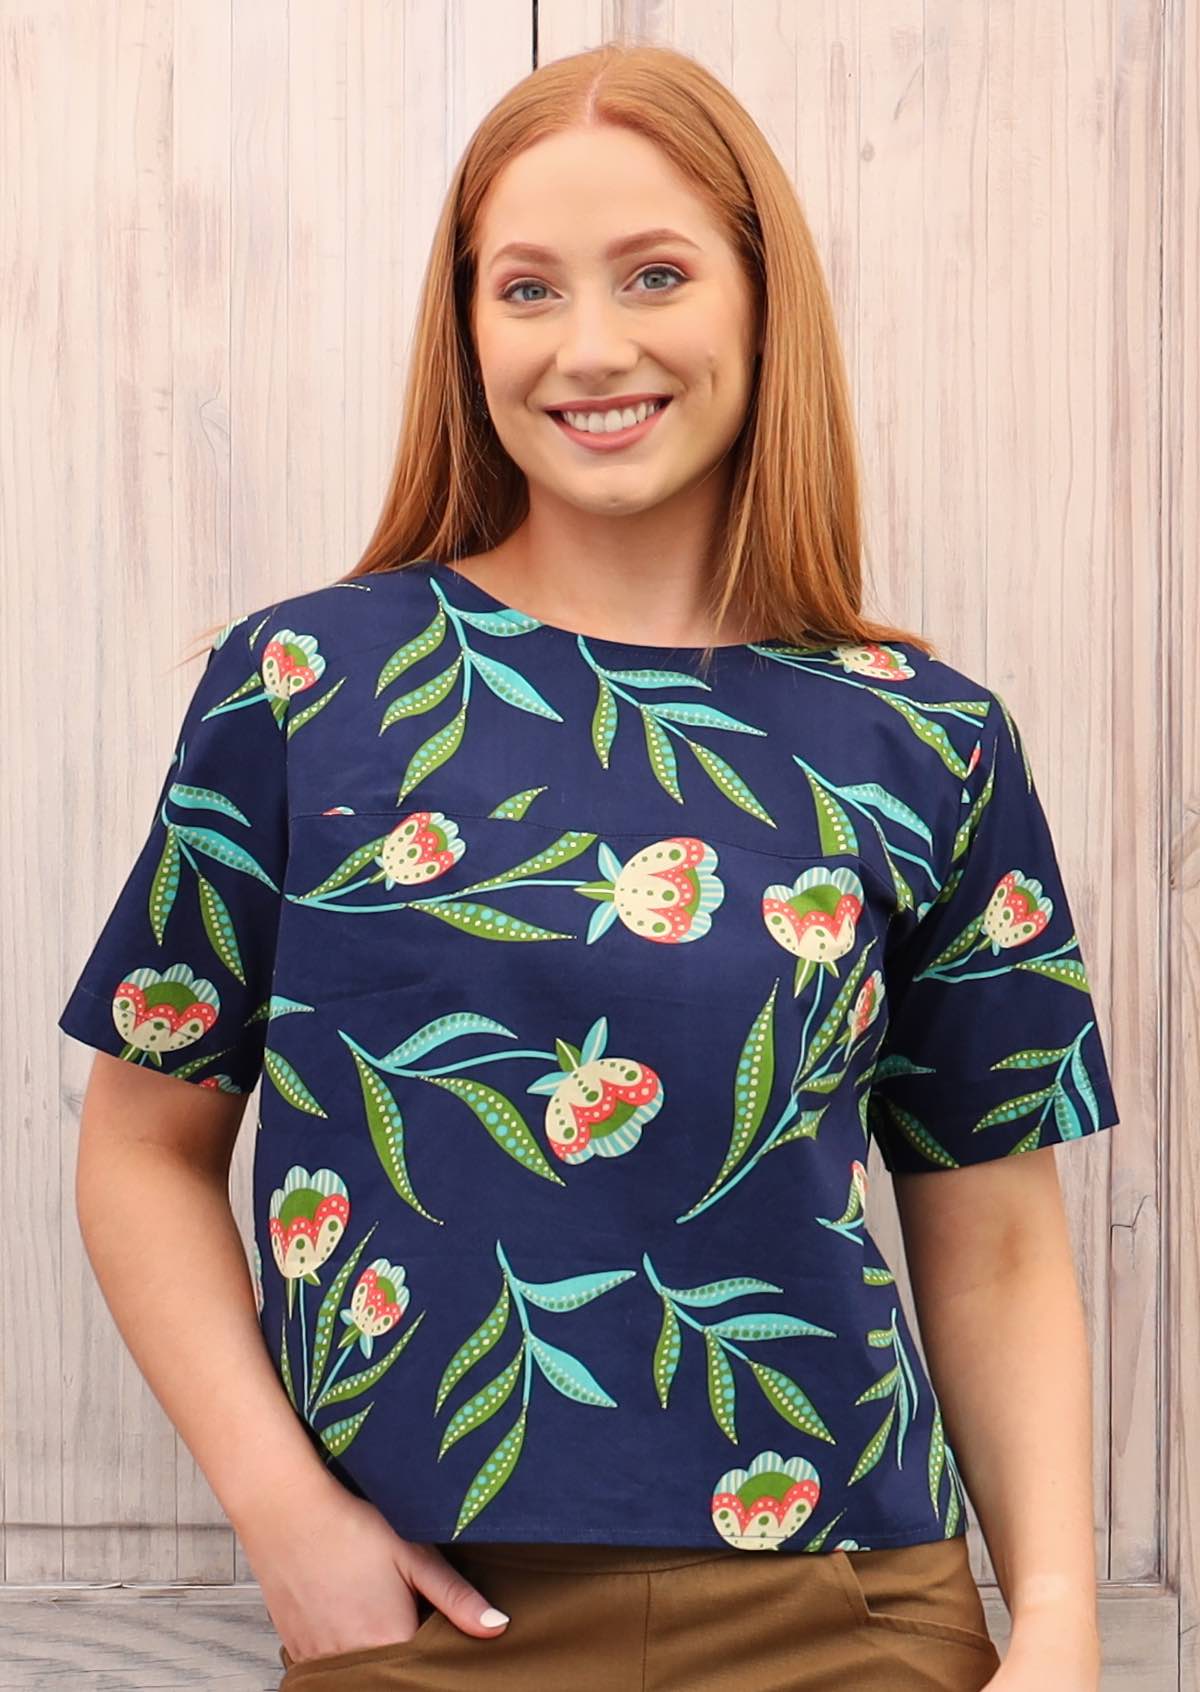 Model smiles in floral cotton relaxed fit top with T-shirt sleeves